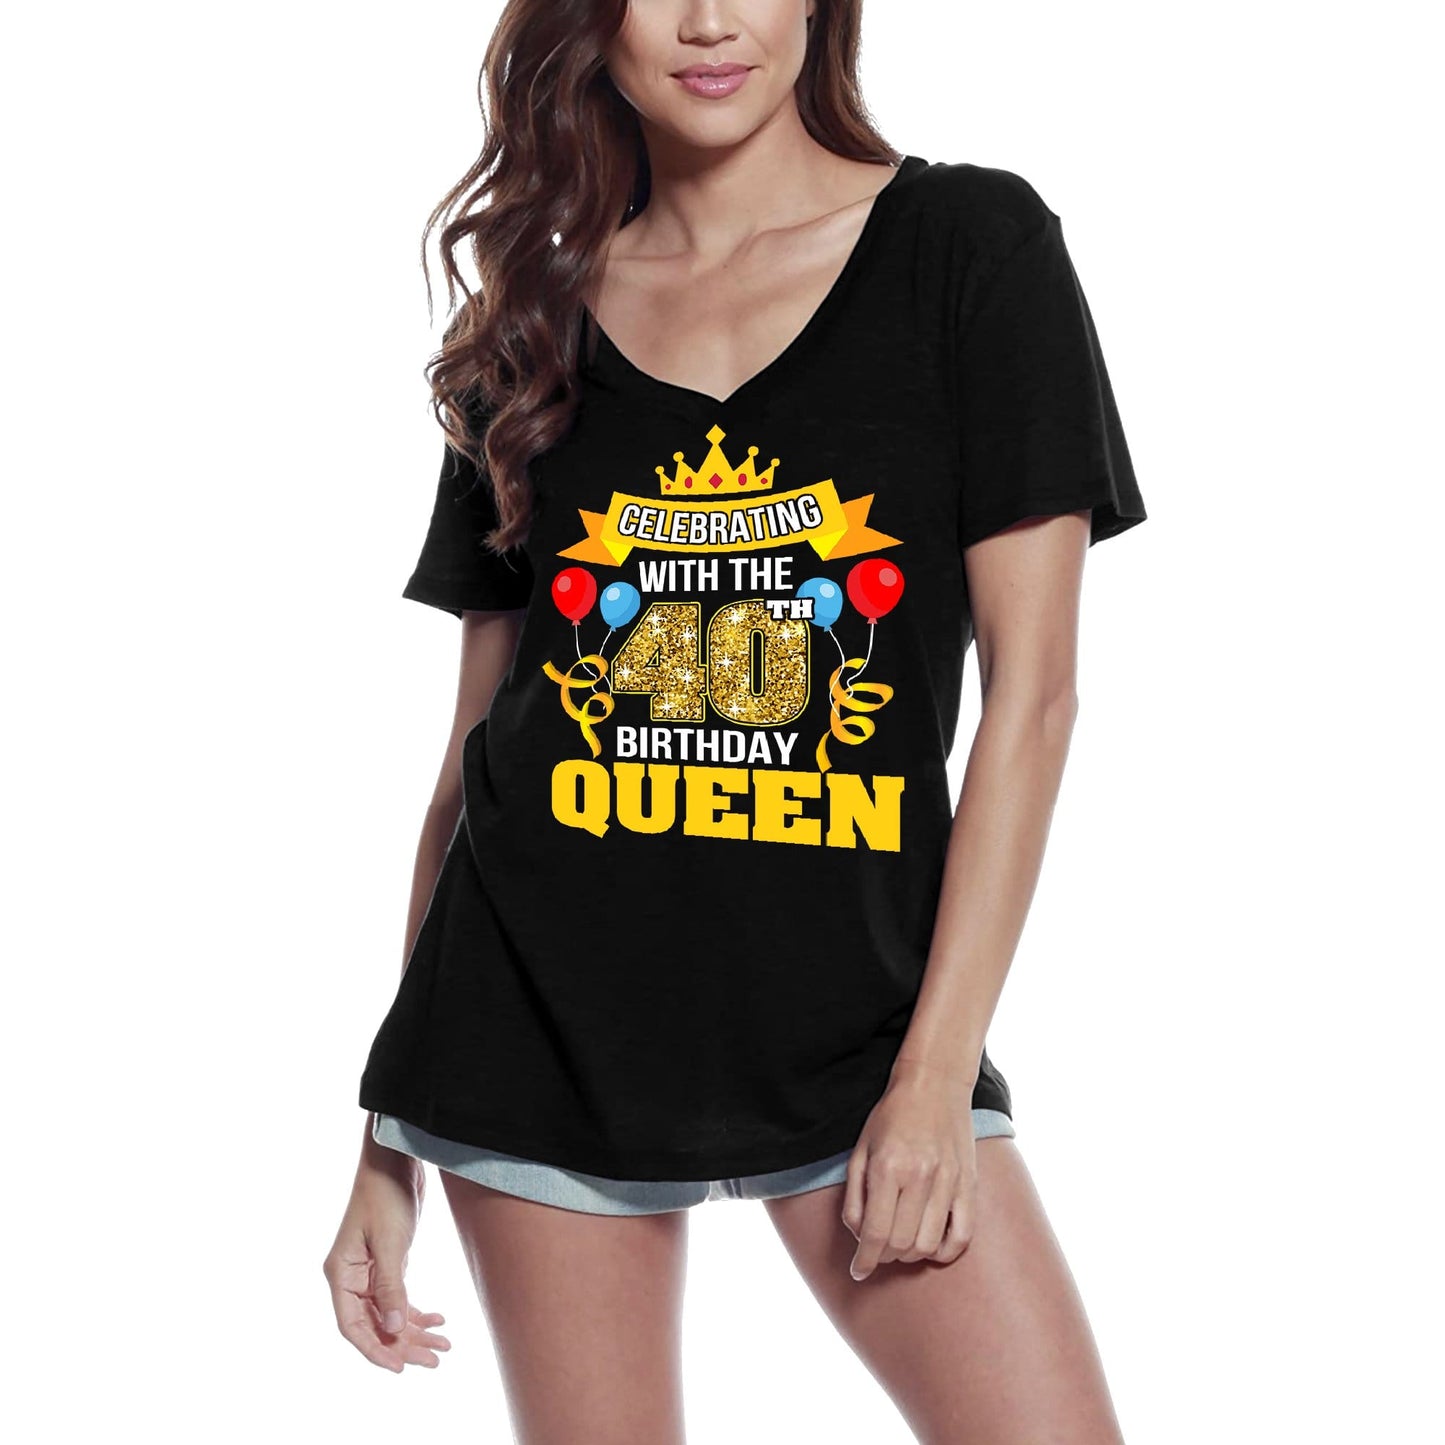 ULTRABASIC Women's T-Shirt Celebrating With the 40th Birthday Queen Shirt for Ladies